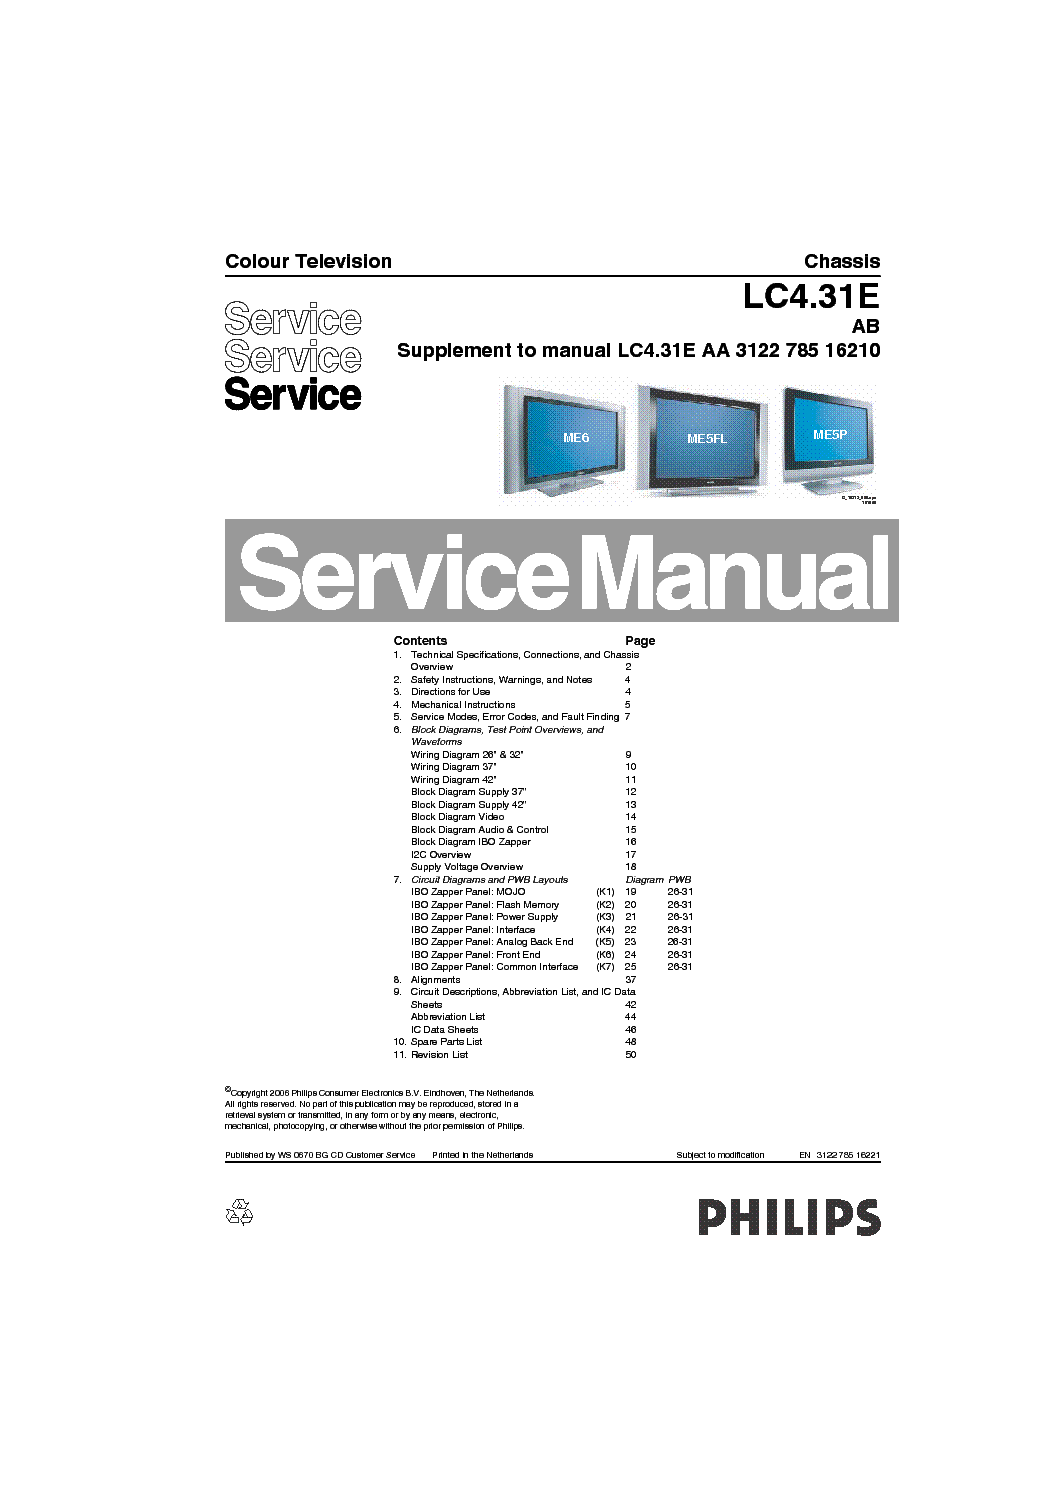 PHILIPS CHASSIS LC4.31E-AB service manual (1st page)